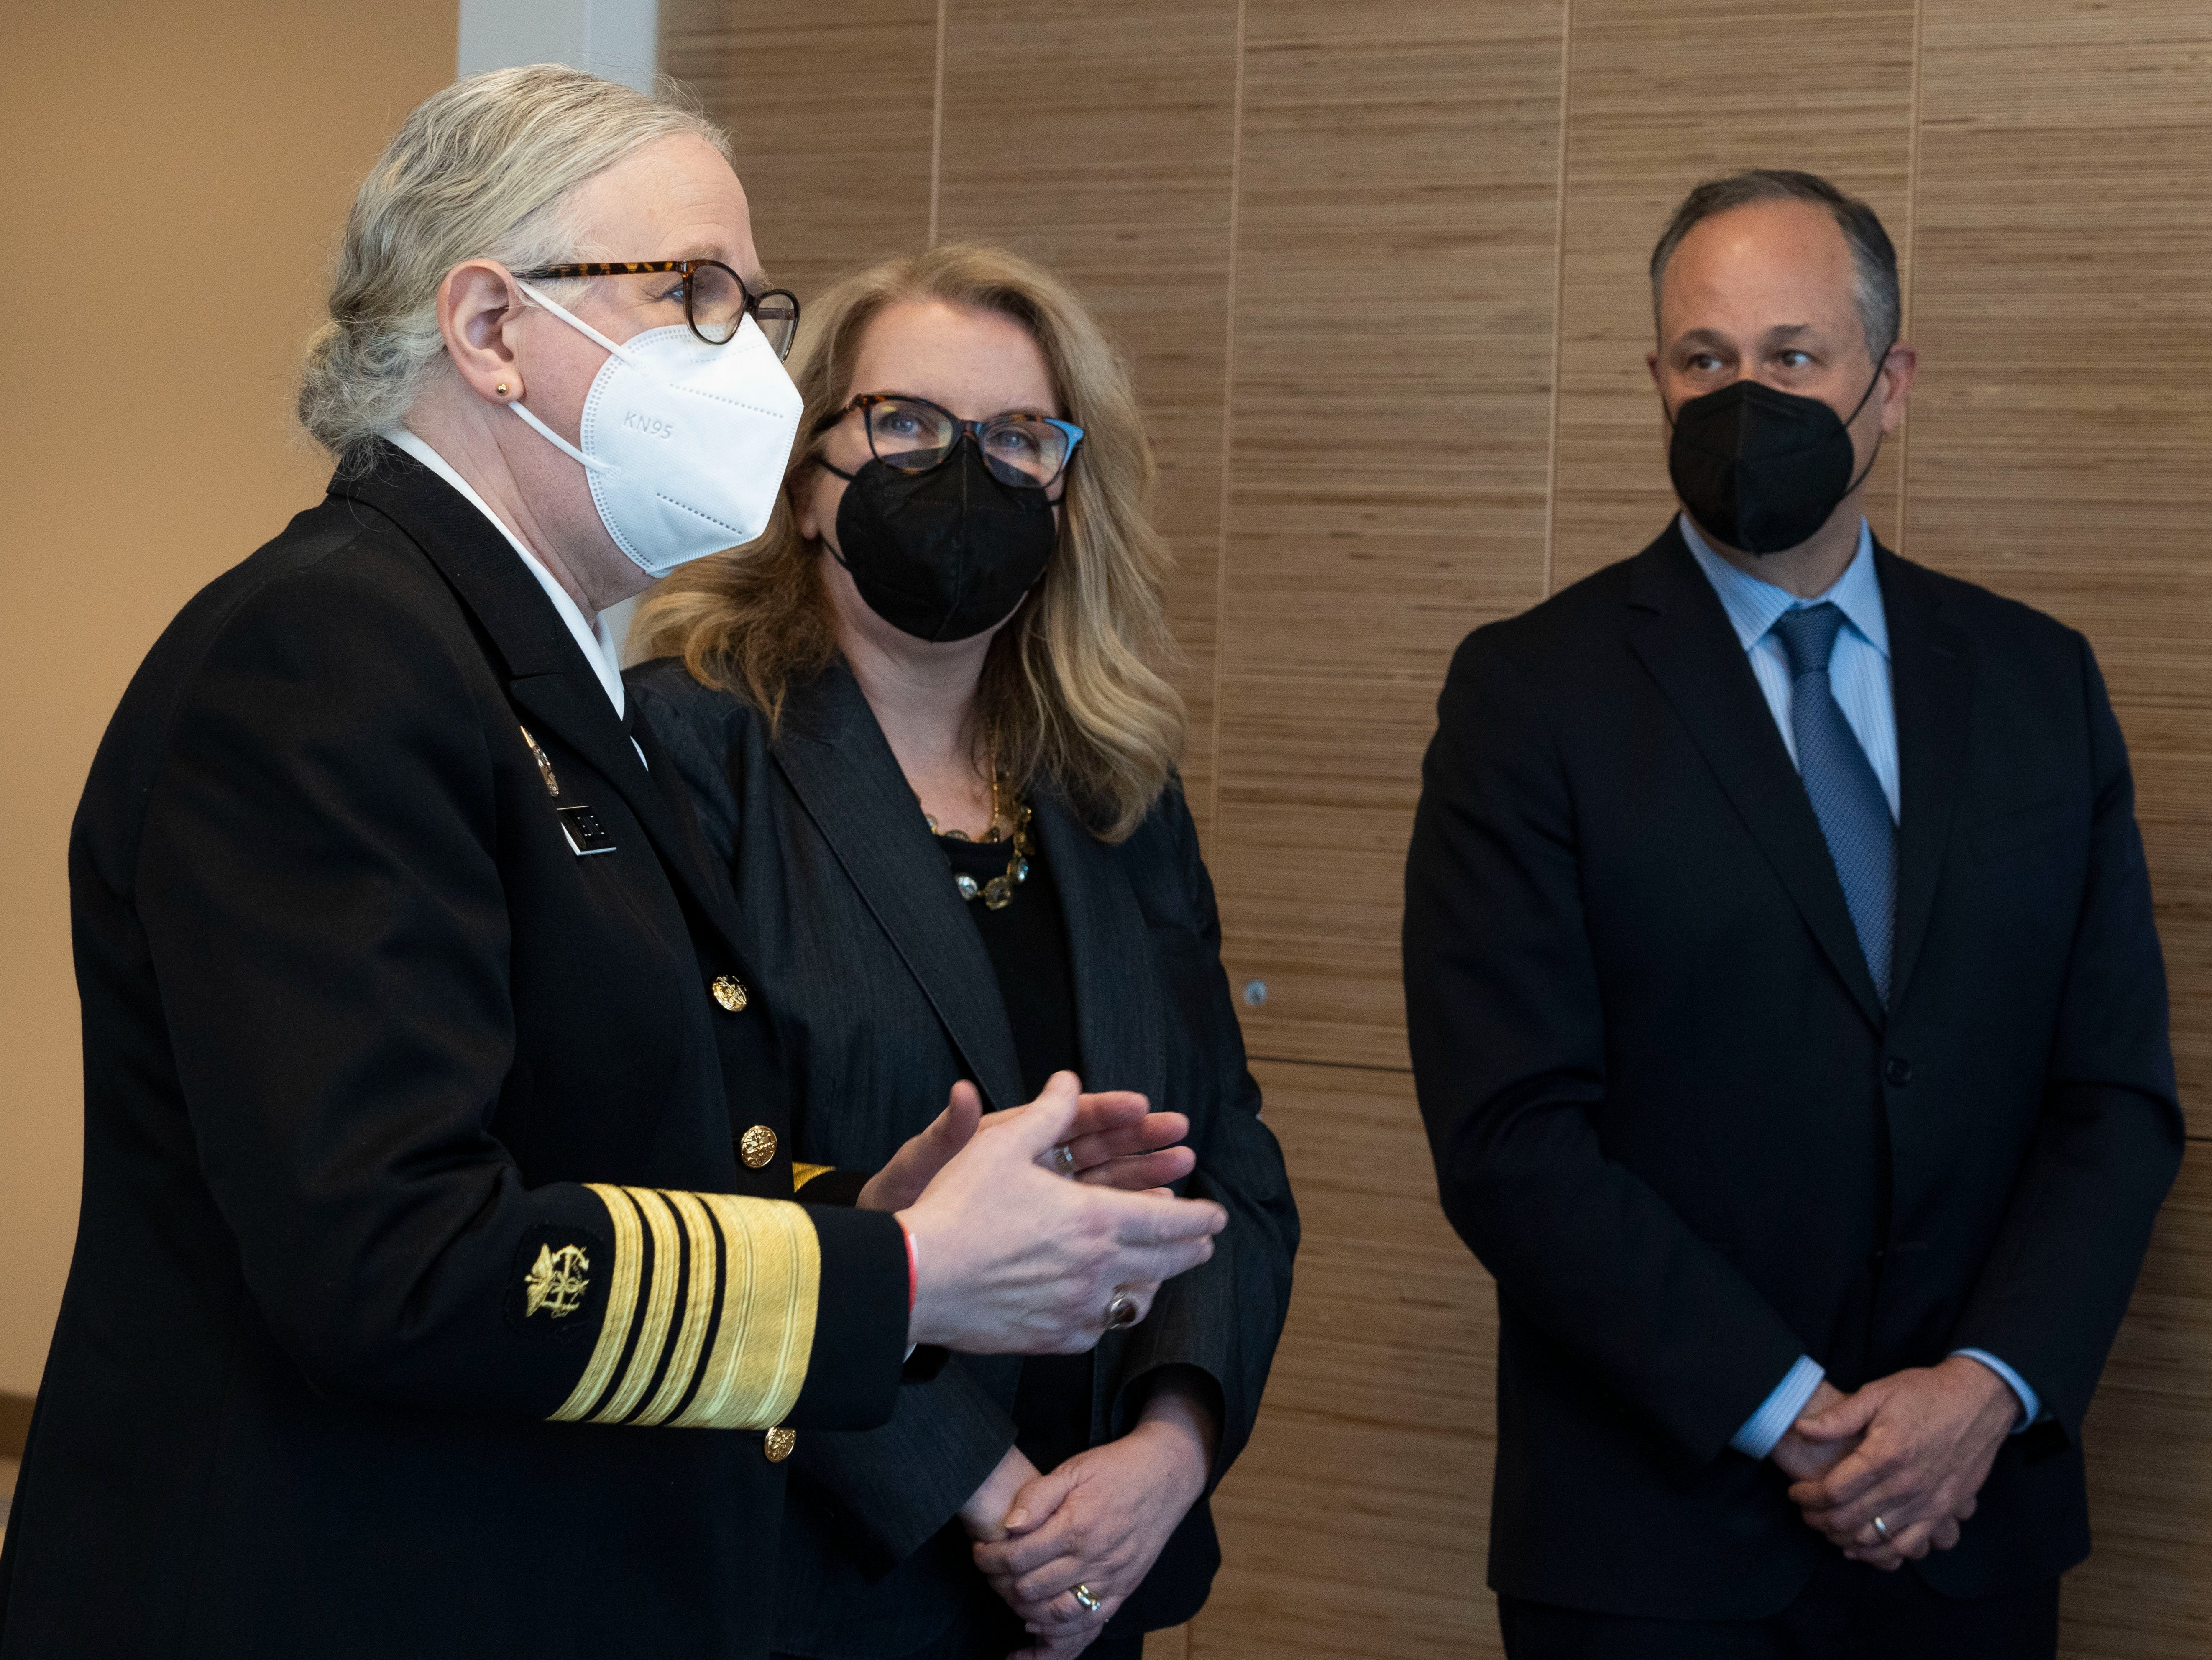 US assistant health secretary Rachel Levine speaks with doctors during a visit to a children’s hospital in Columbus, Ohio on 2 March